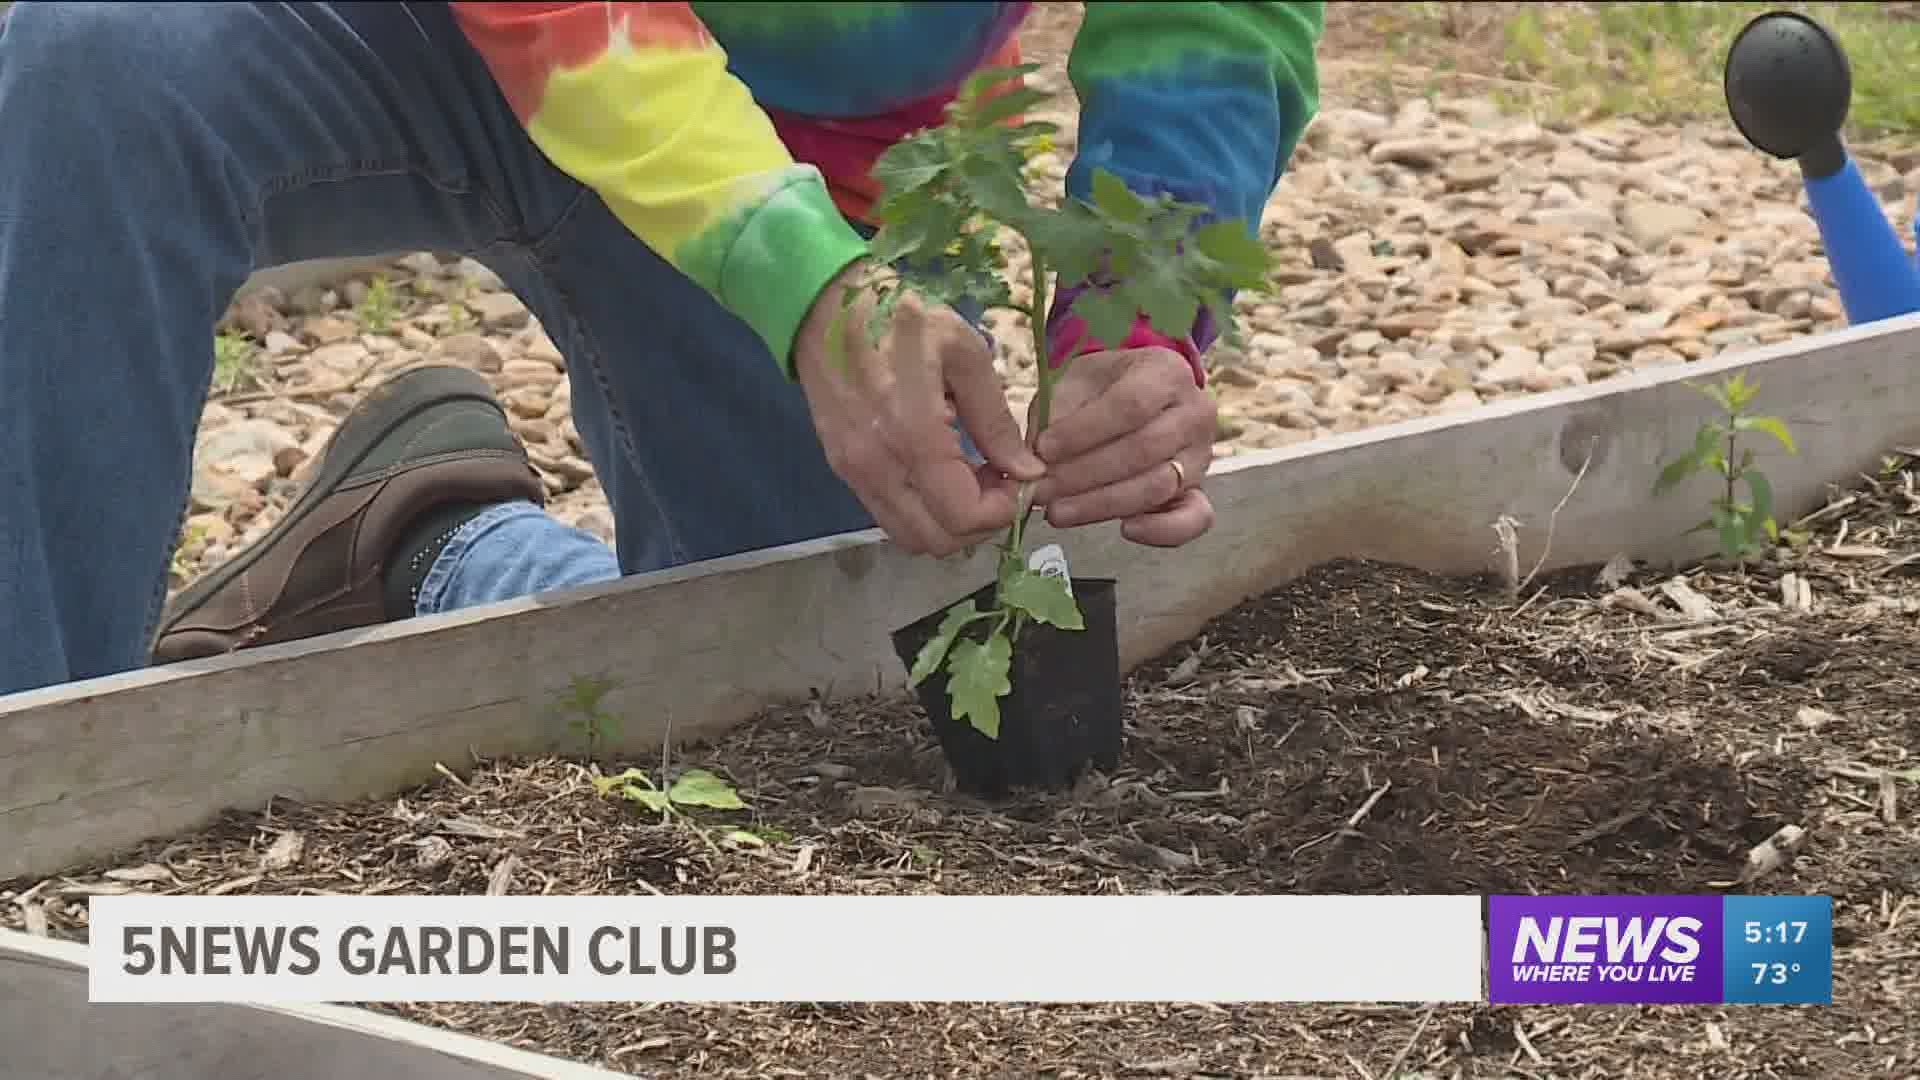 Join the 5NEWS Garden Club this week for tips to growing everyone's favorite summertime vegetable - Tomatoes!